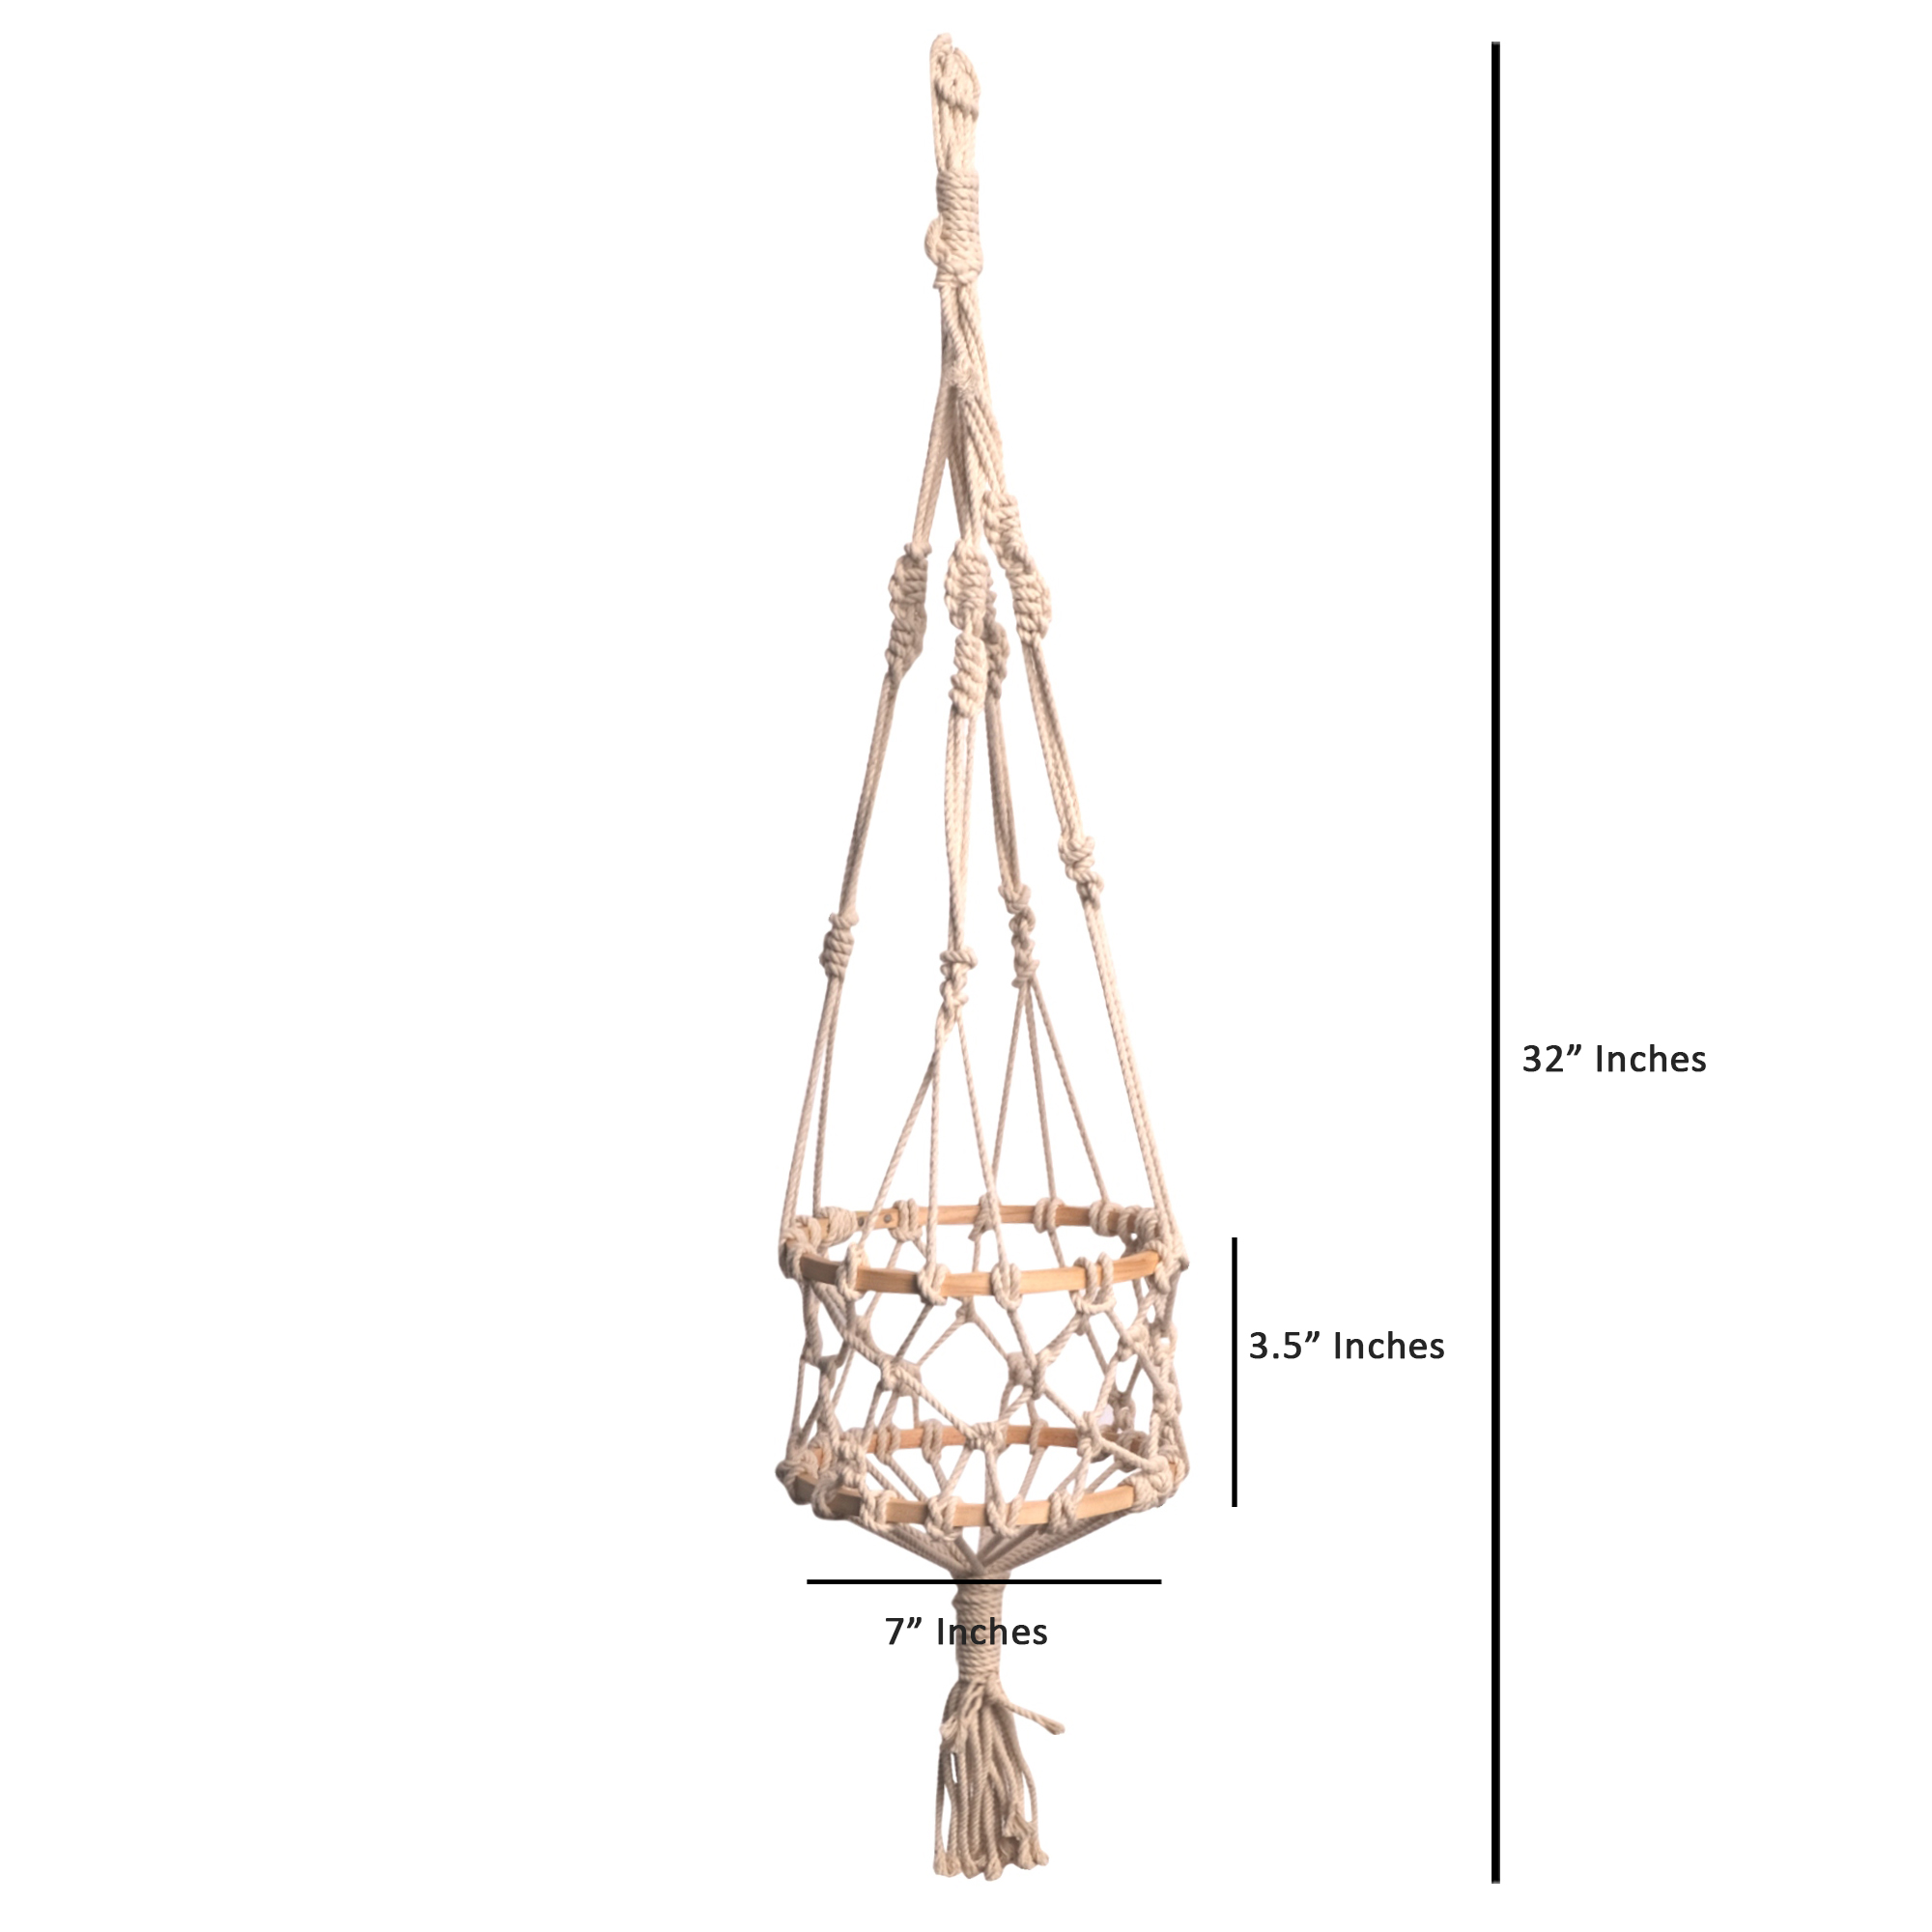 Product: Upcycled Embroidery Frame As Cotton Macrame Planter